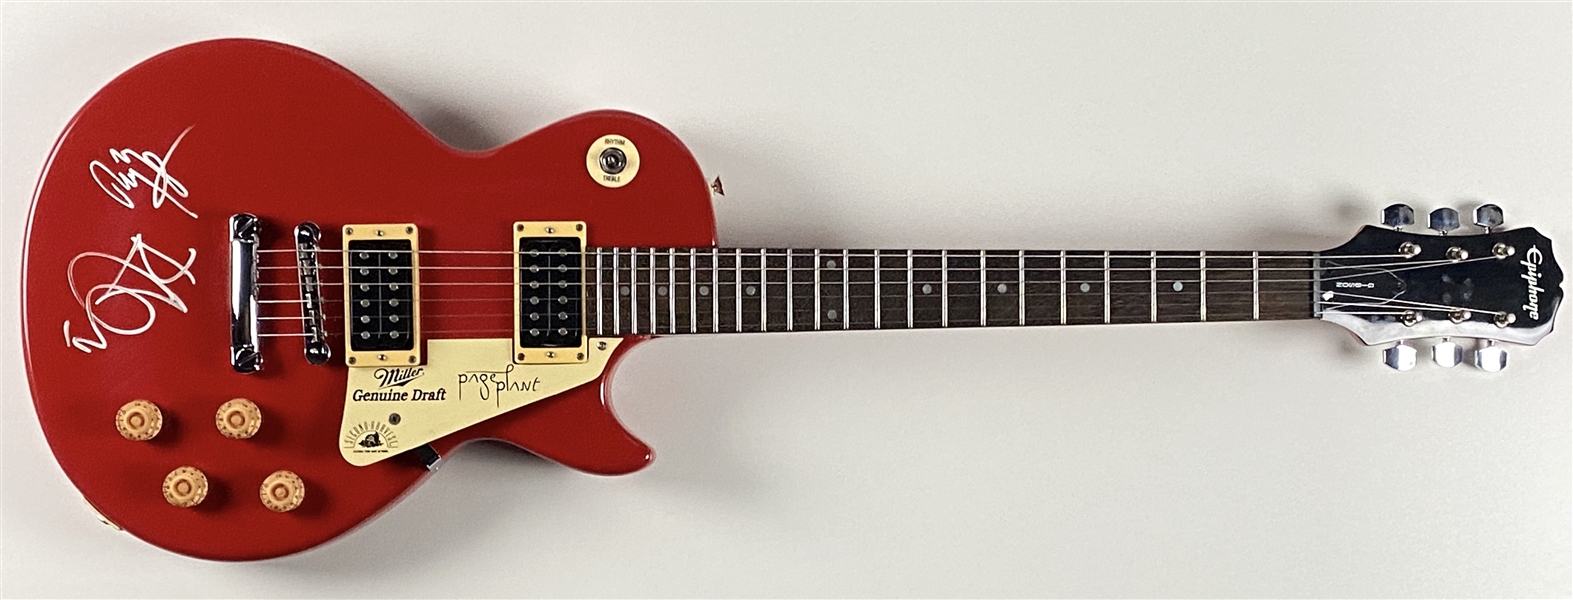 Led Zeppelin: Robert Plant & Jimmy Page Dual-Signed Red Les Paul Electric Guitar (2 Sigs) (Beckett/BAS Guaranteed) 